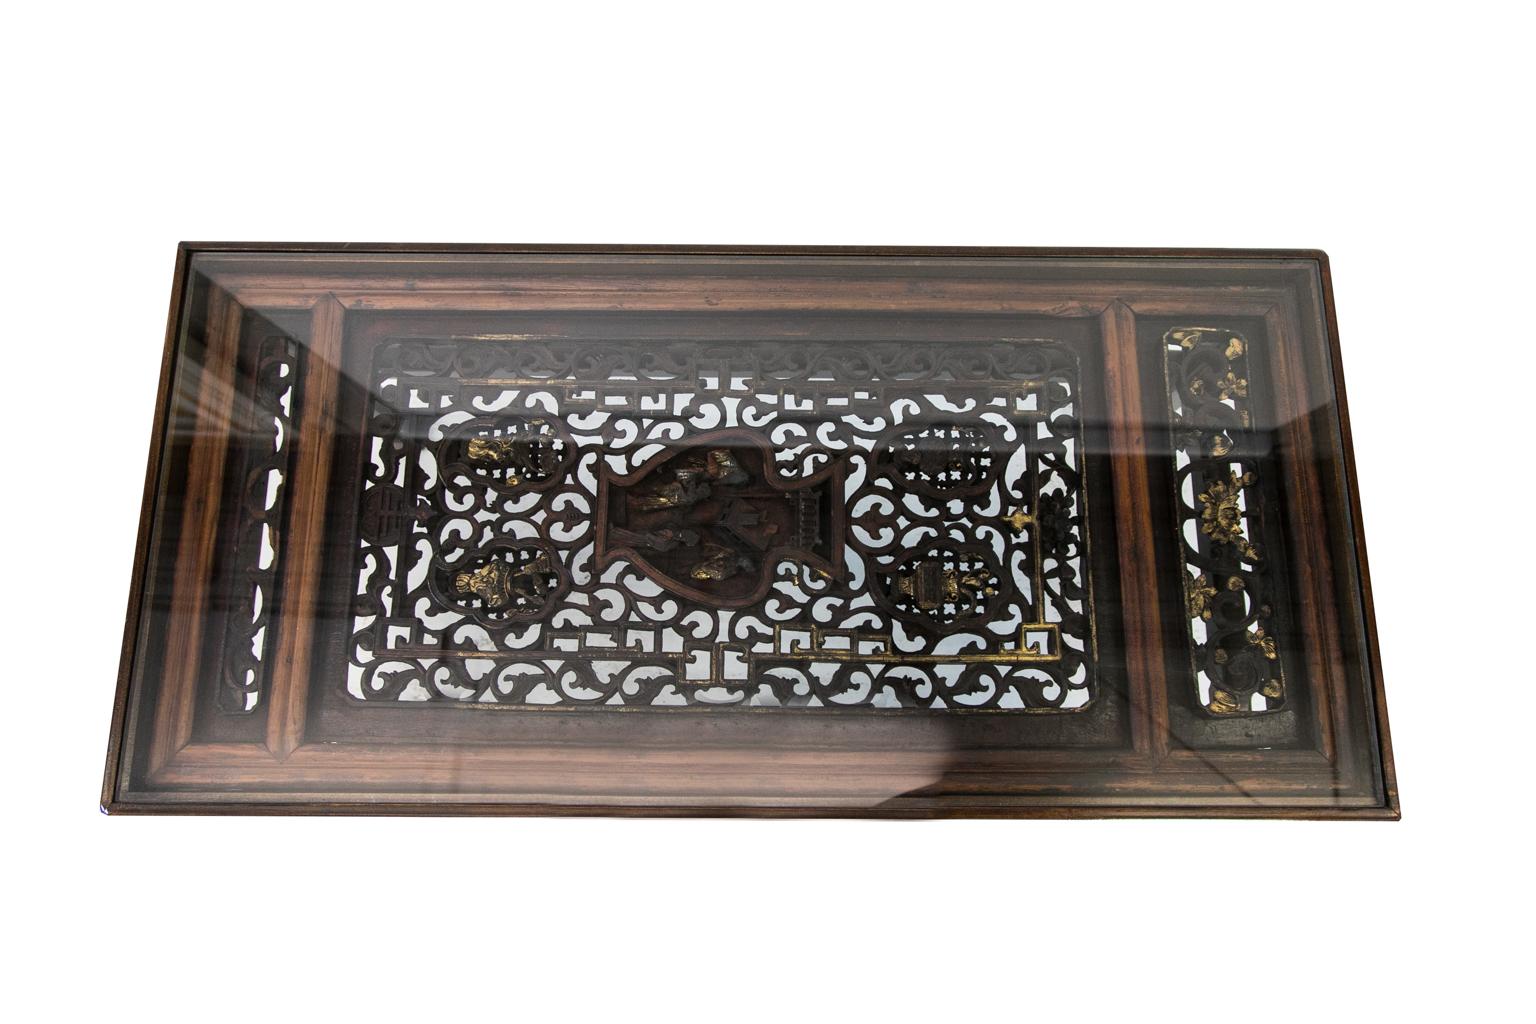 Carved Chinese coffee table is made from a carved Chinese panel with a custom made base. The panel is carved in high relief with gilt highlights. The scene depicts various vases and people figures.